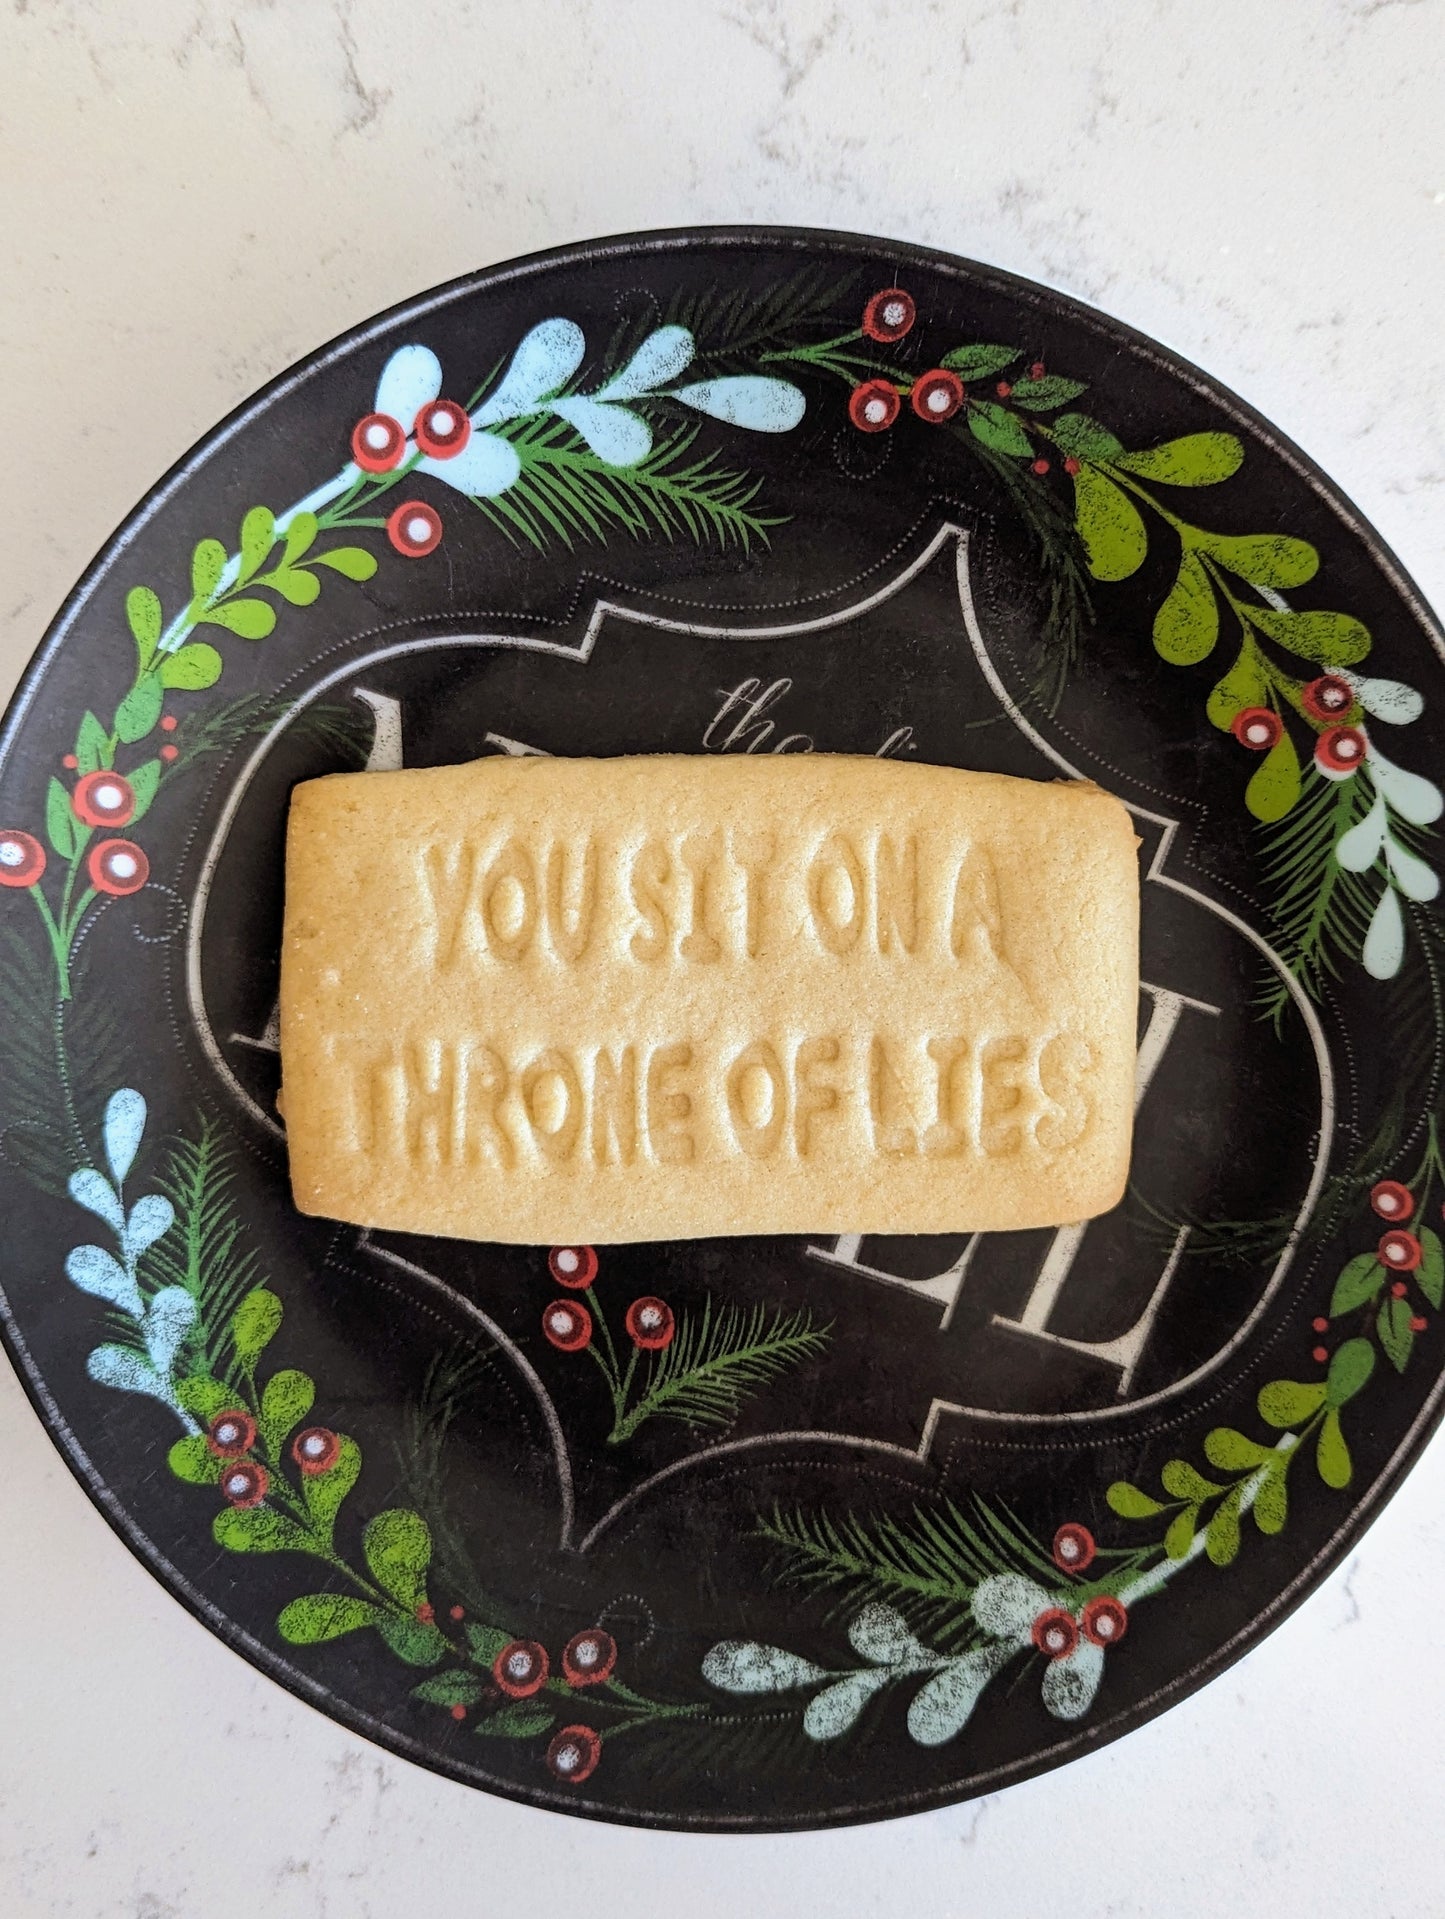 You Sit on a Throne of Lies - Elf Cookie Cutter